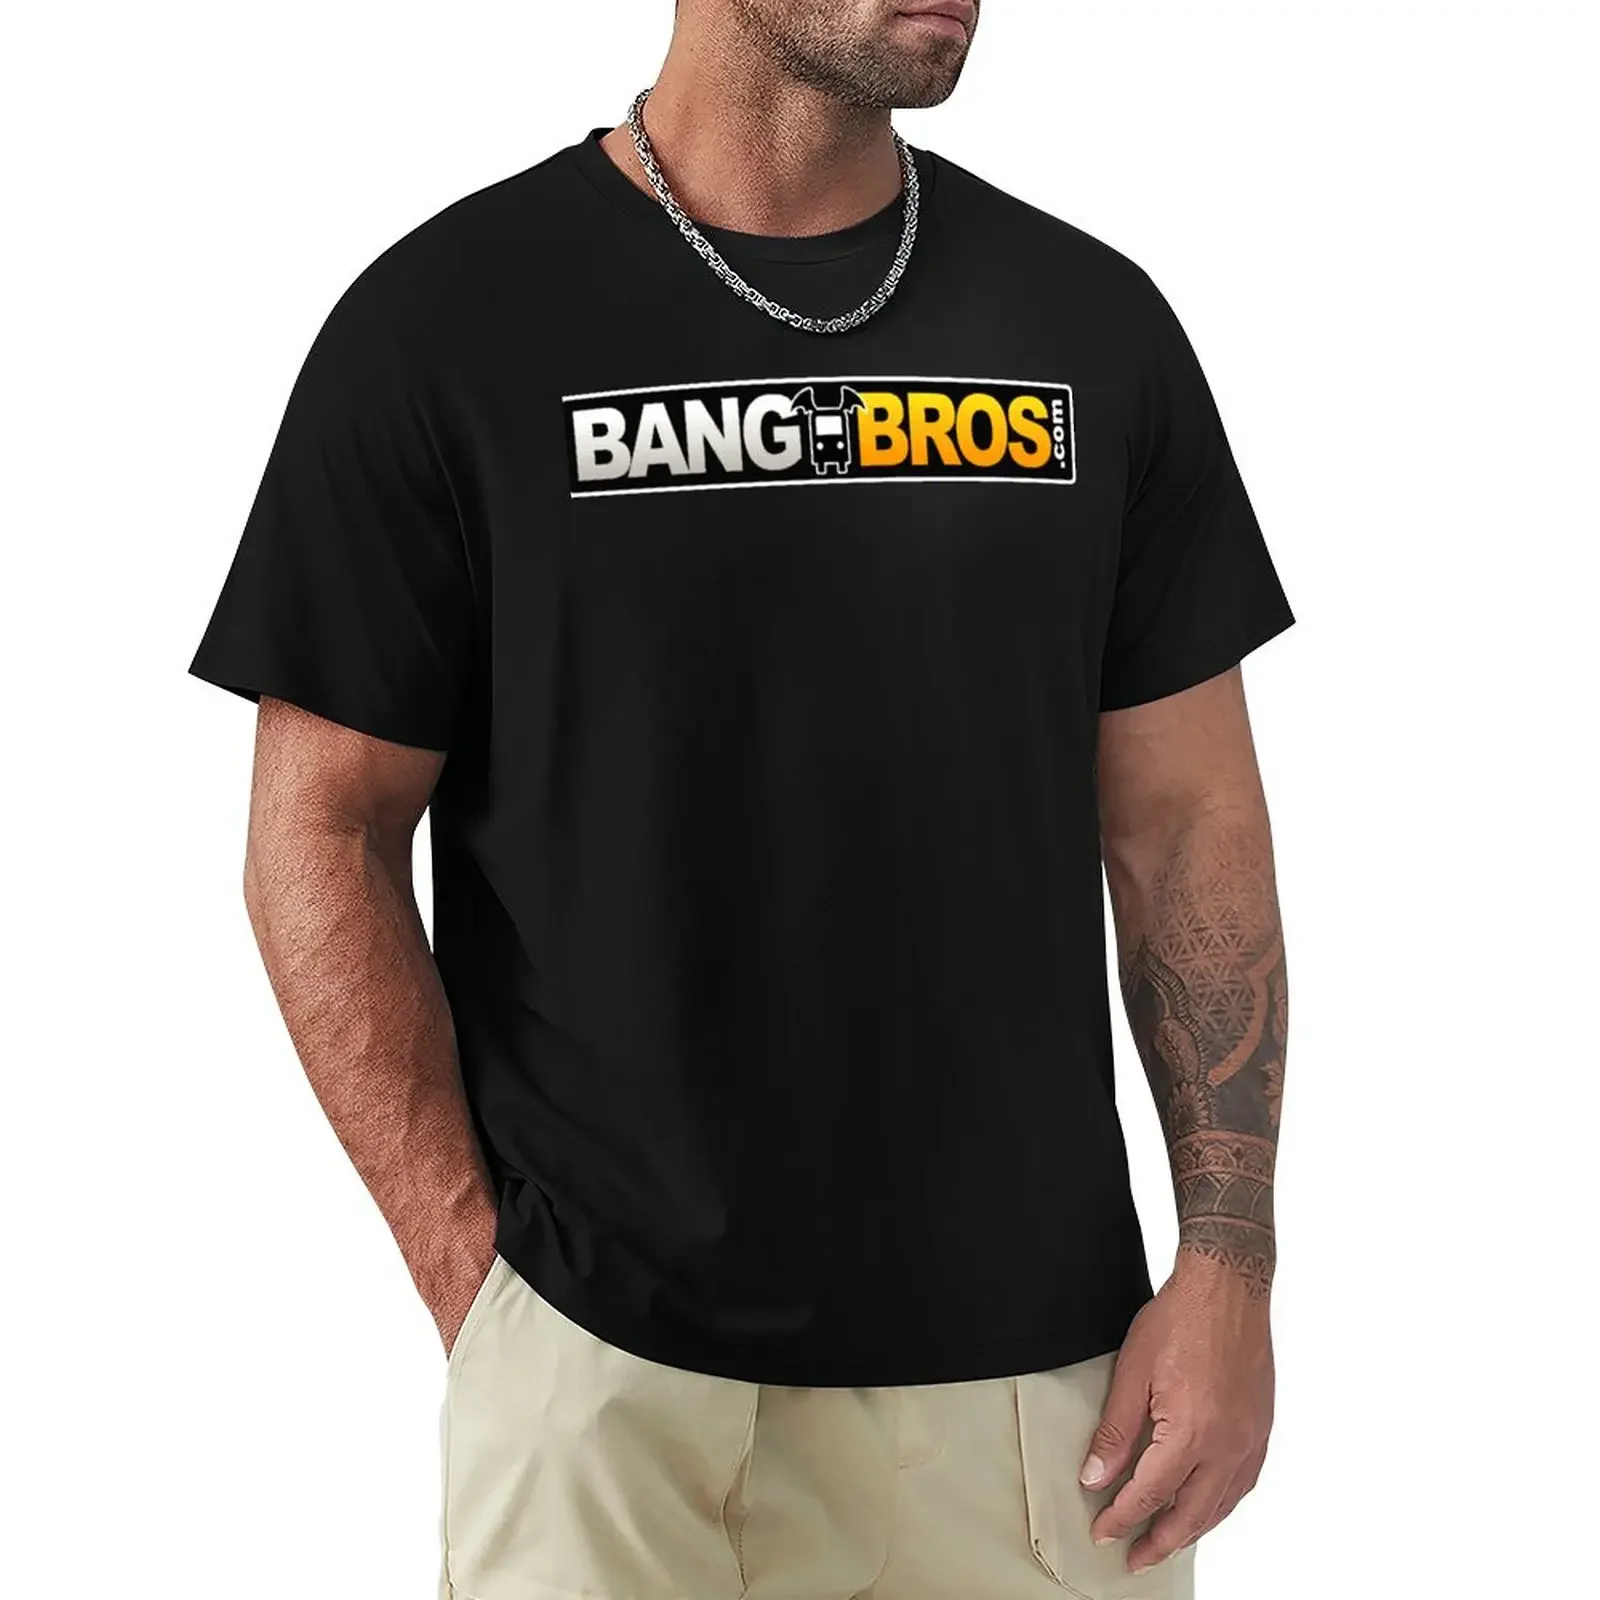 

Bangbros T-Shirt Blouse customs design your own mens graphic t-shirts pack